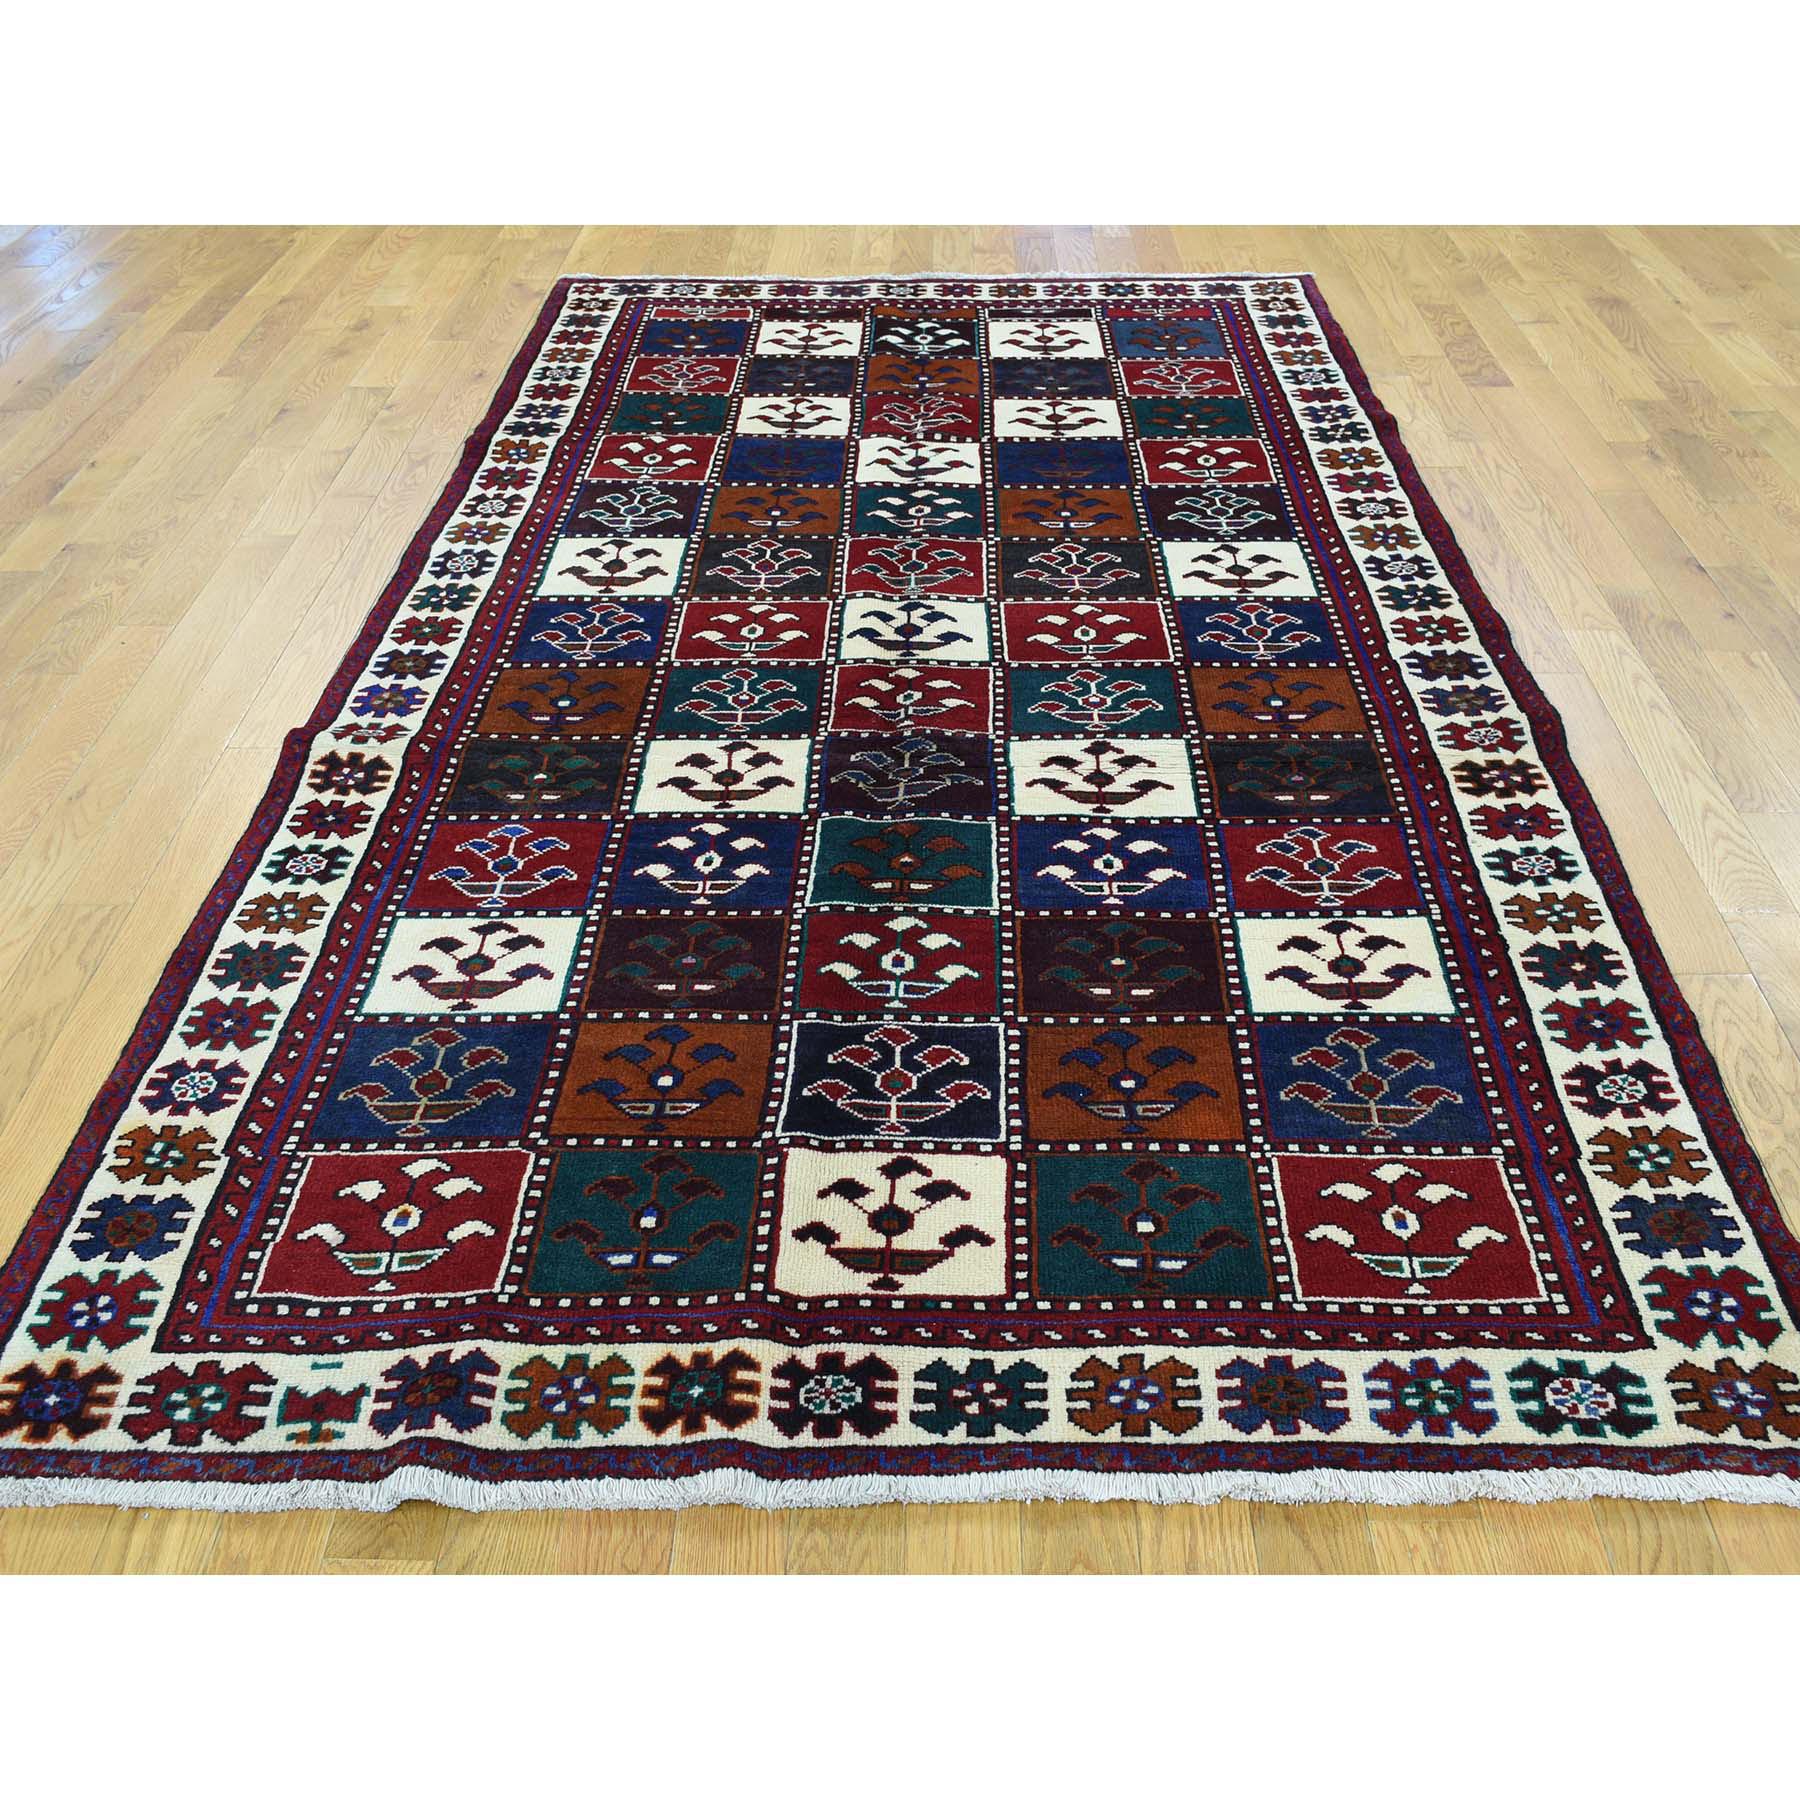 This fabulous Hand-Knotted carpet has been created and designed for extra strength and durability. This rug has been handcrafted for weeks in the traditional method that is used to make Rugs. This is truly a one-of-kind piece. 

Exact Rug Size in